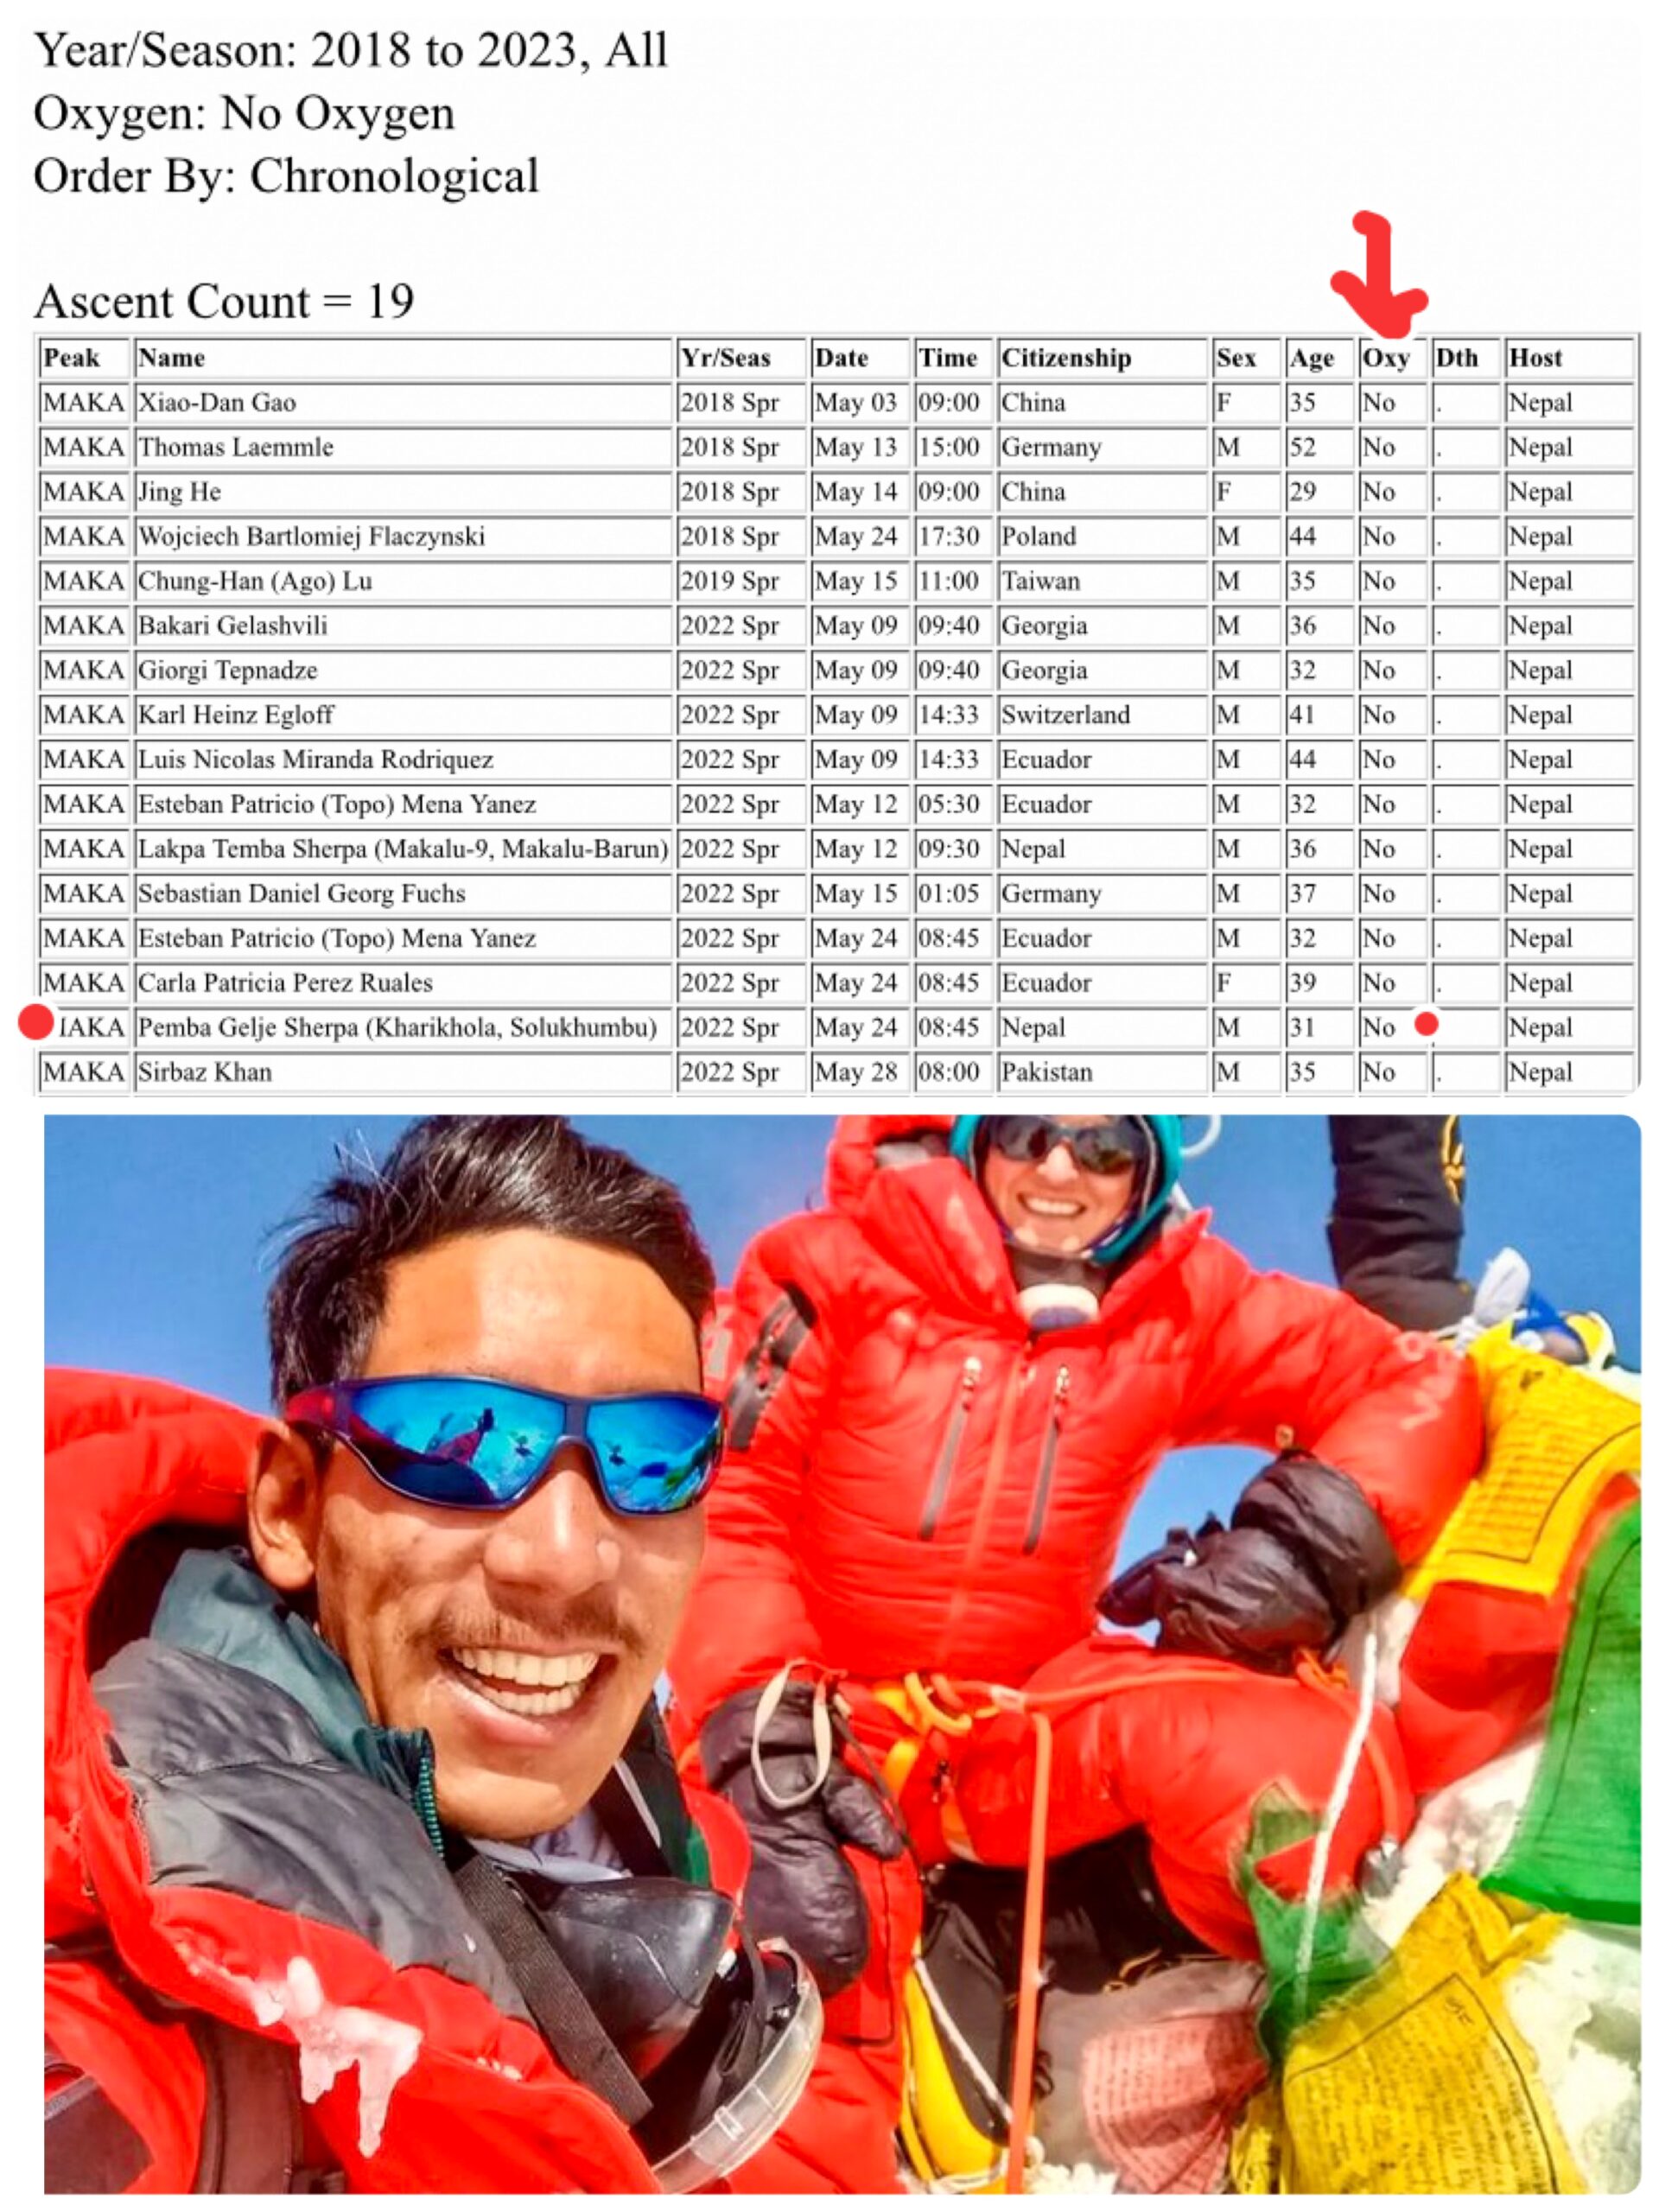 Perfect statistics do not exist. A small error here: Pemba Gelje Sherpa's ascent on Makalu registered as no-O2 climb, however he never claimed on his social media to have ascended Makalu without O2. Photo: Summit phot